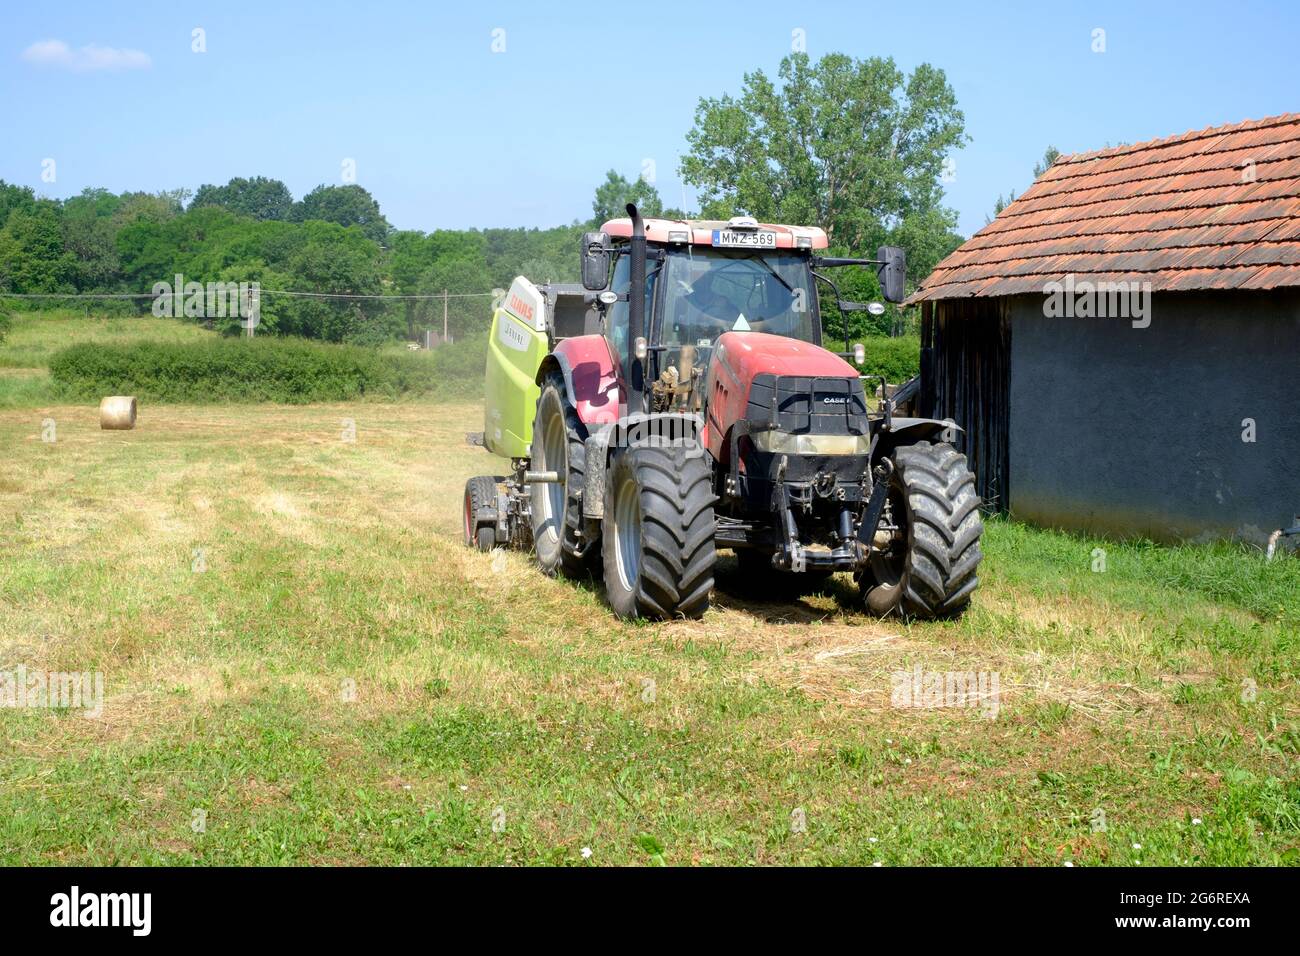 case 170 cvx tractor with claas 465 rc baler behind in rural meadow baling dried cut grass into bales zala county hungary Stock Photo